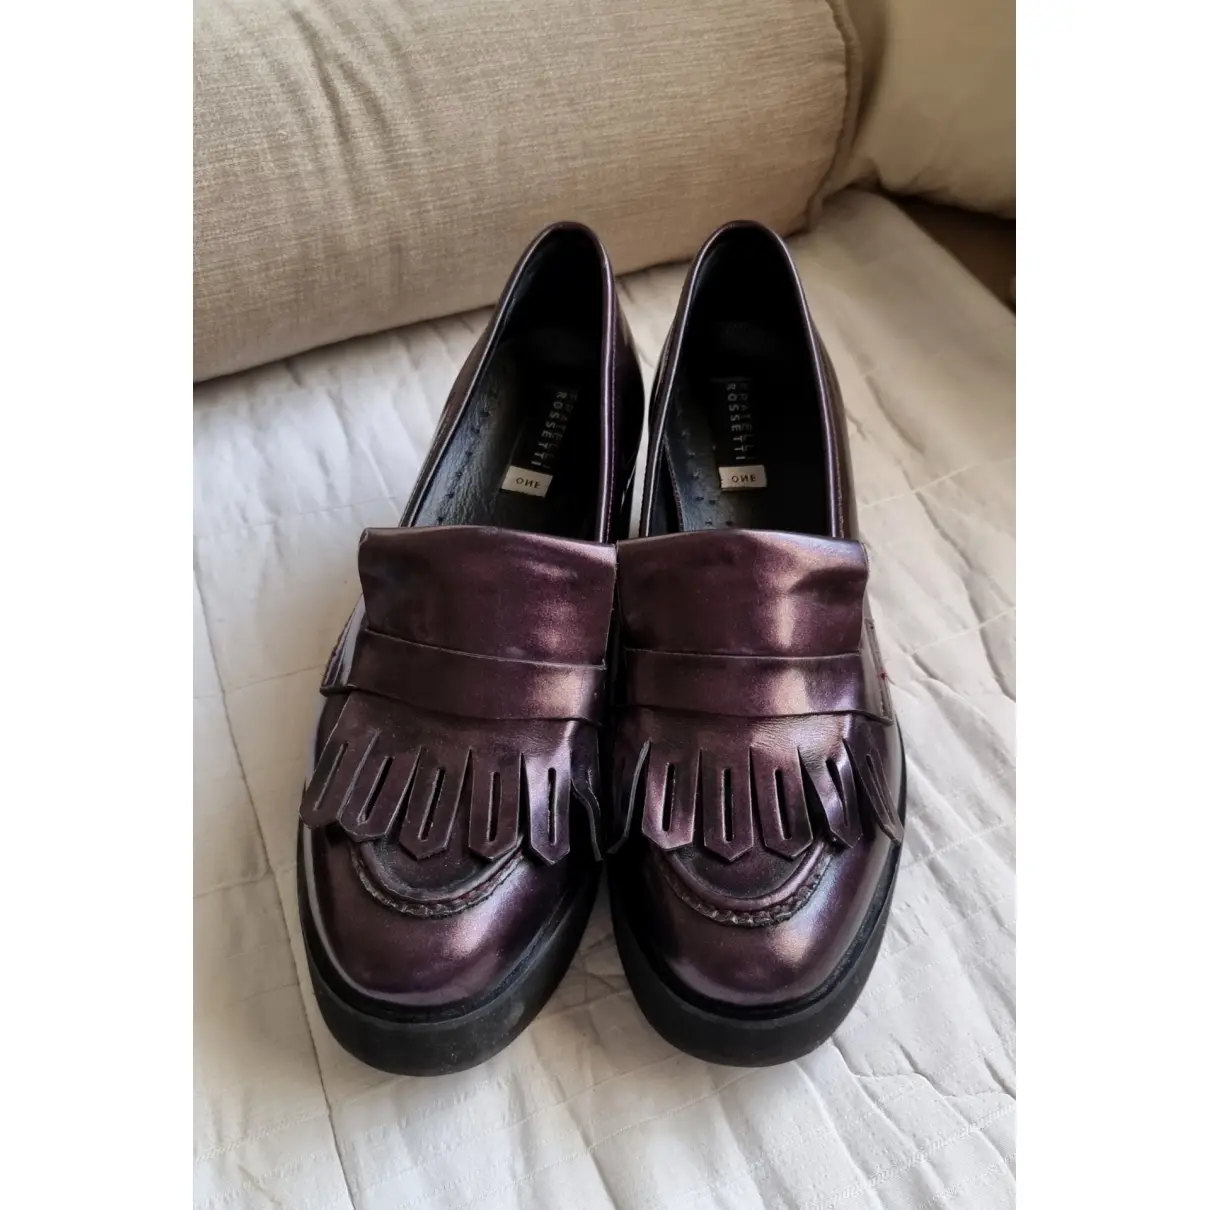 Buy Fratelli Rossetti Leather flats online